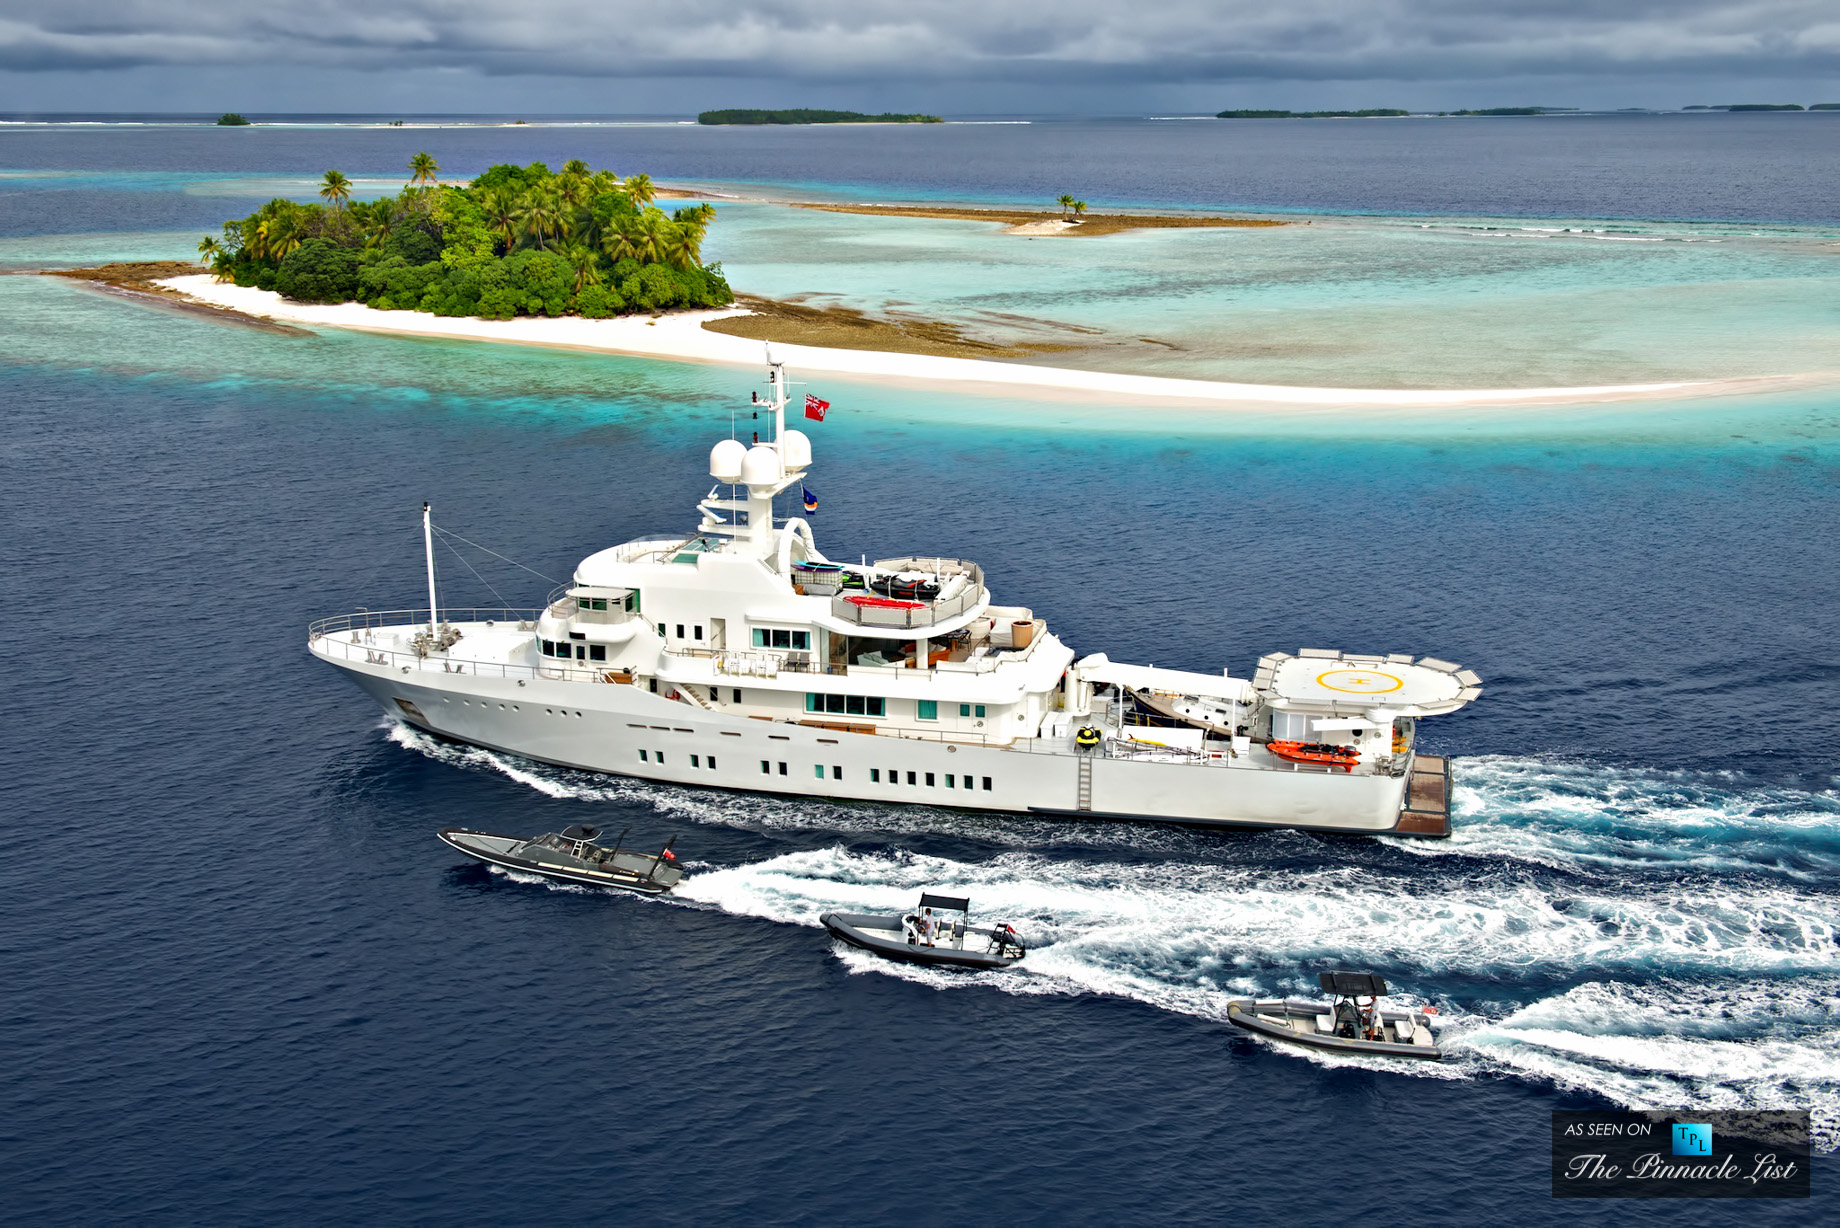 Senses Superyacht – Charter Availability for Caribbean and South Pacific